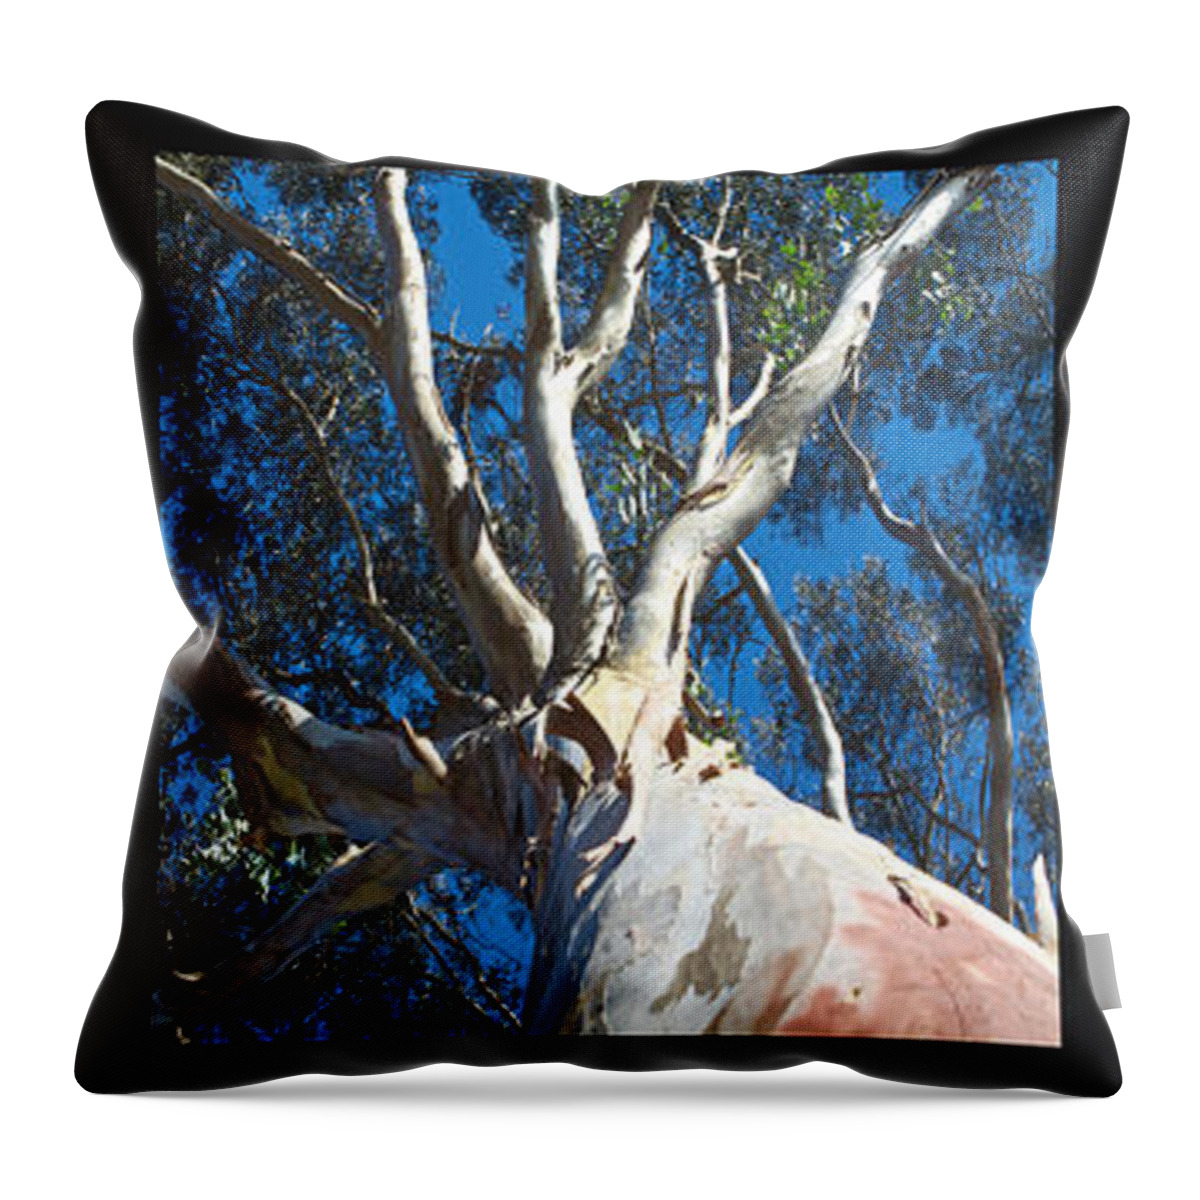 Bluff Throw Pillow featuring the photograph Eucalyptus Tree Panel Triptych by SC Heffner